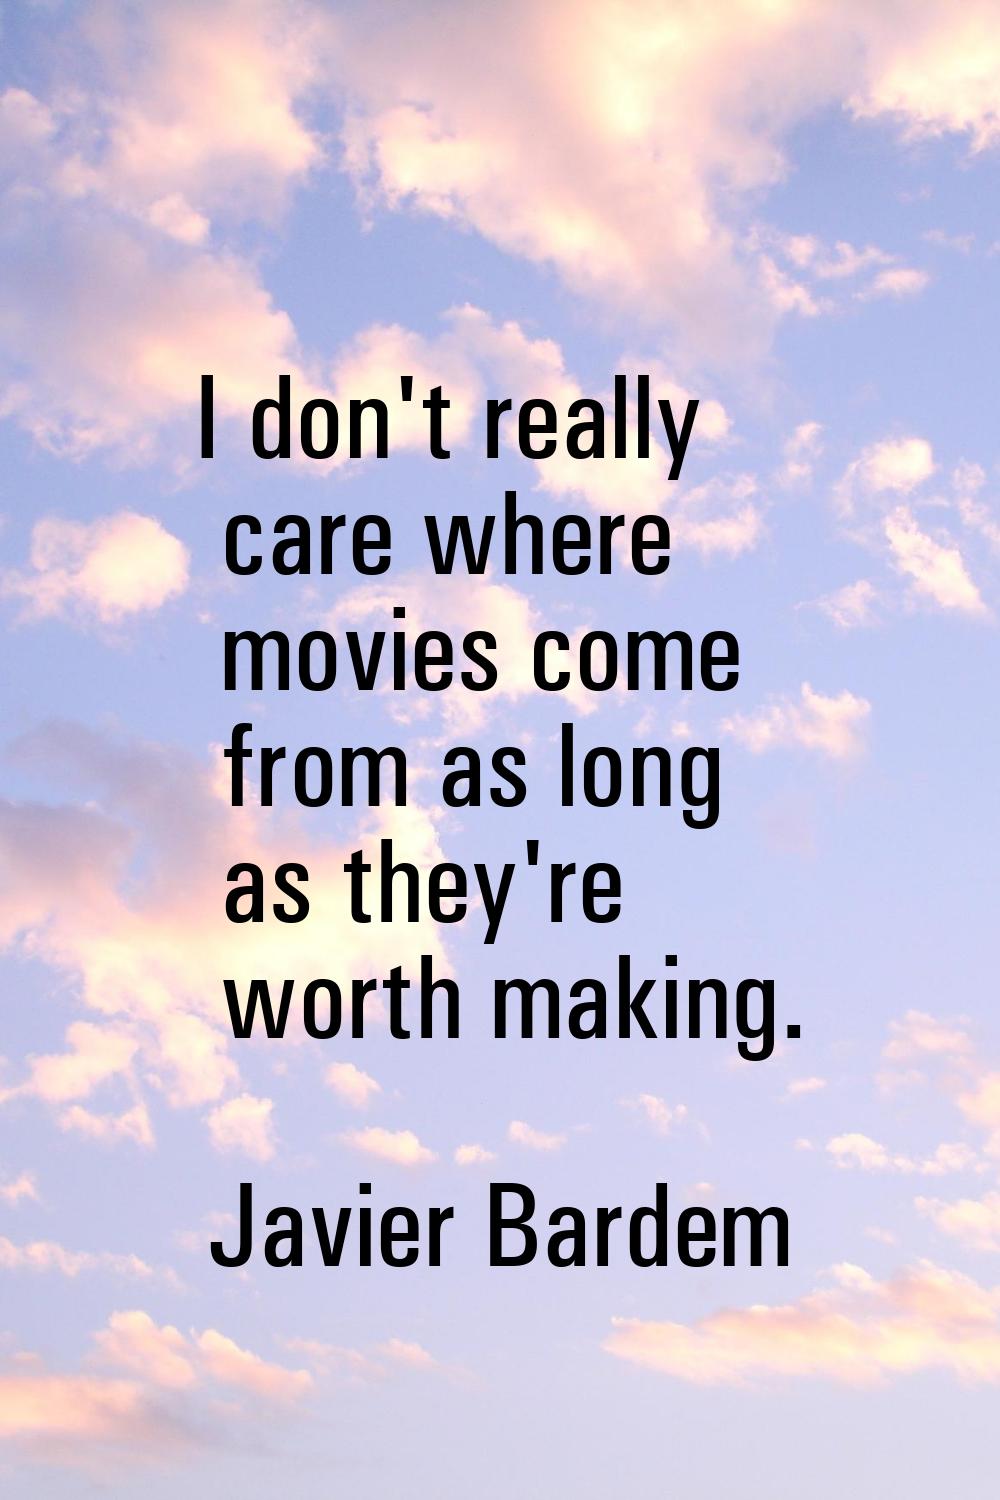 I don't really care where movies come from as long as they're worth making.